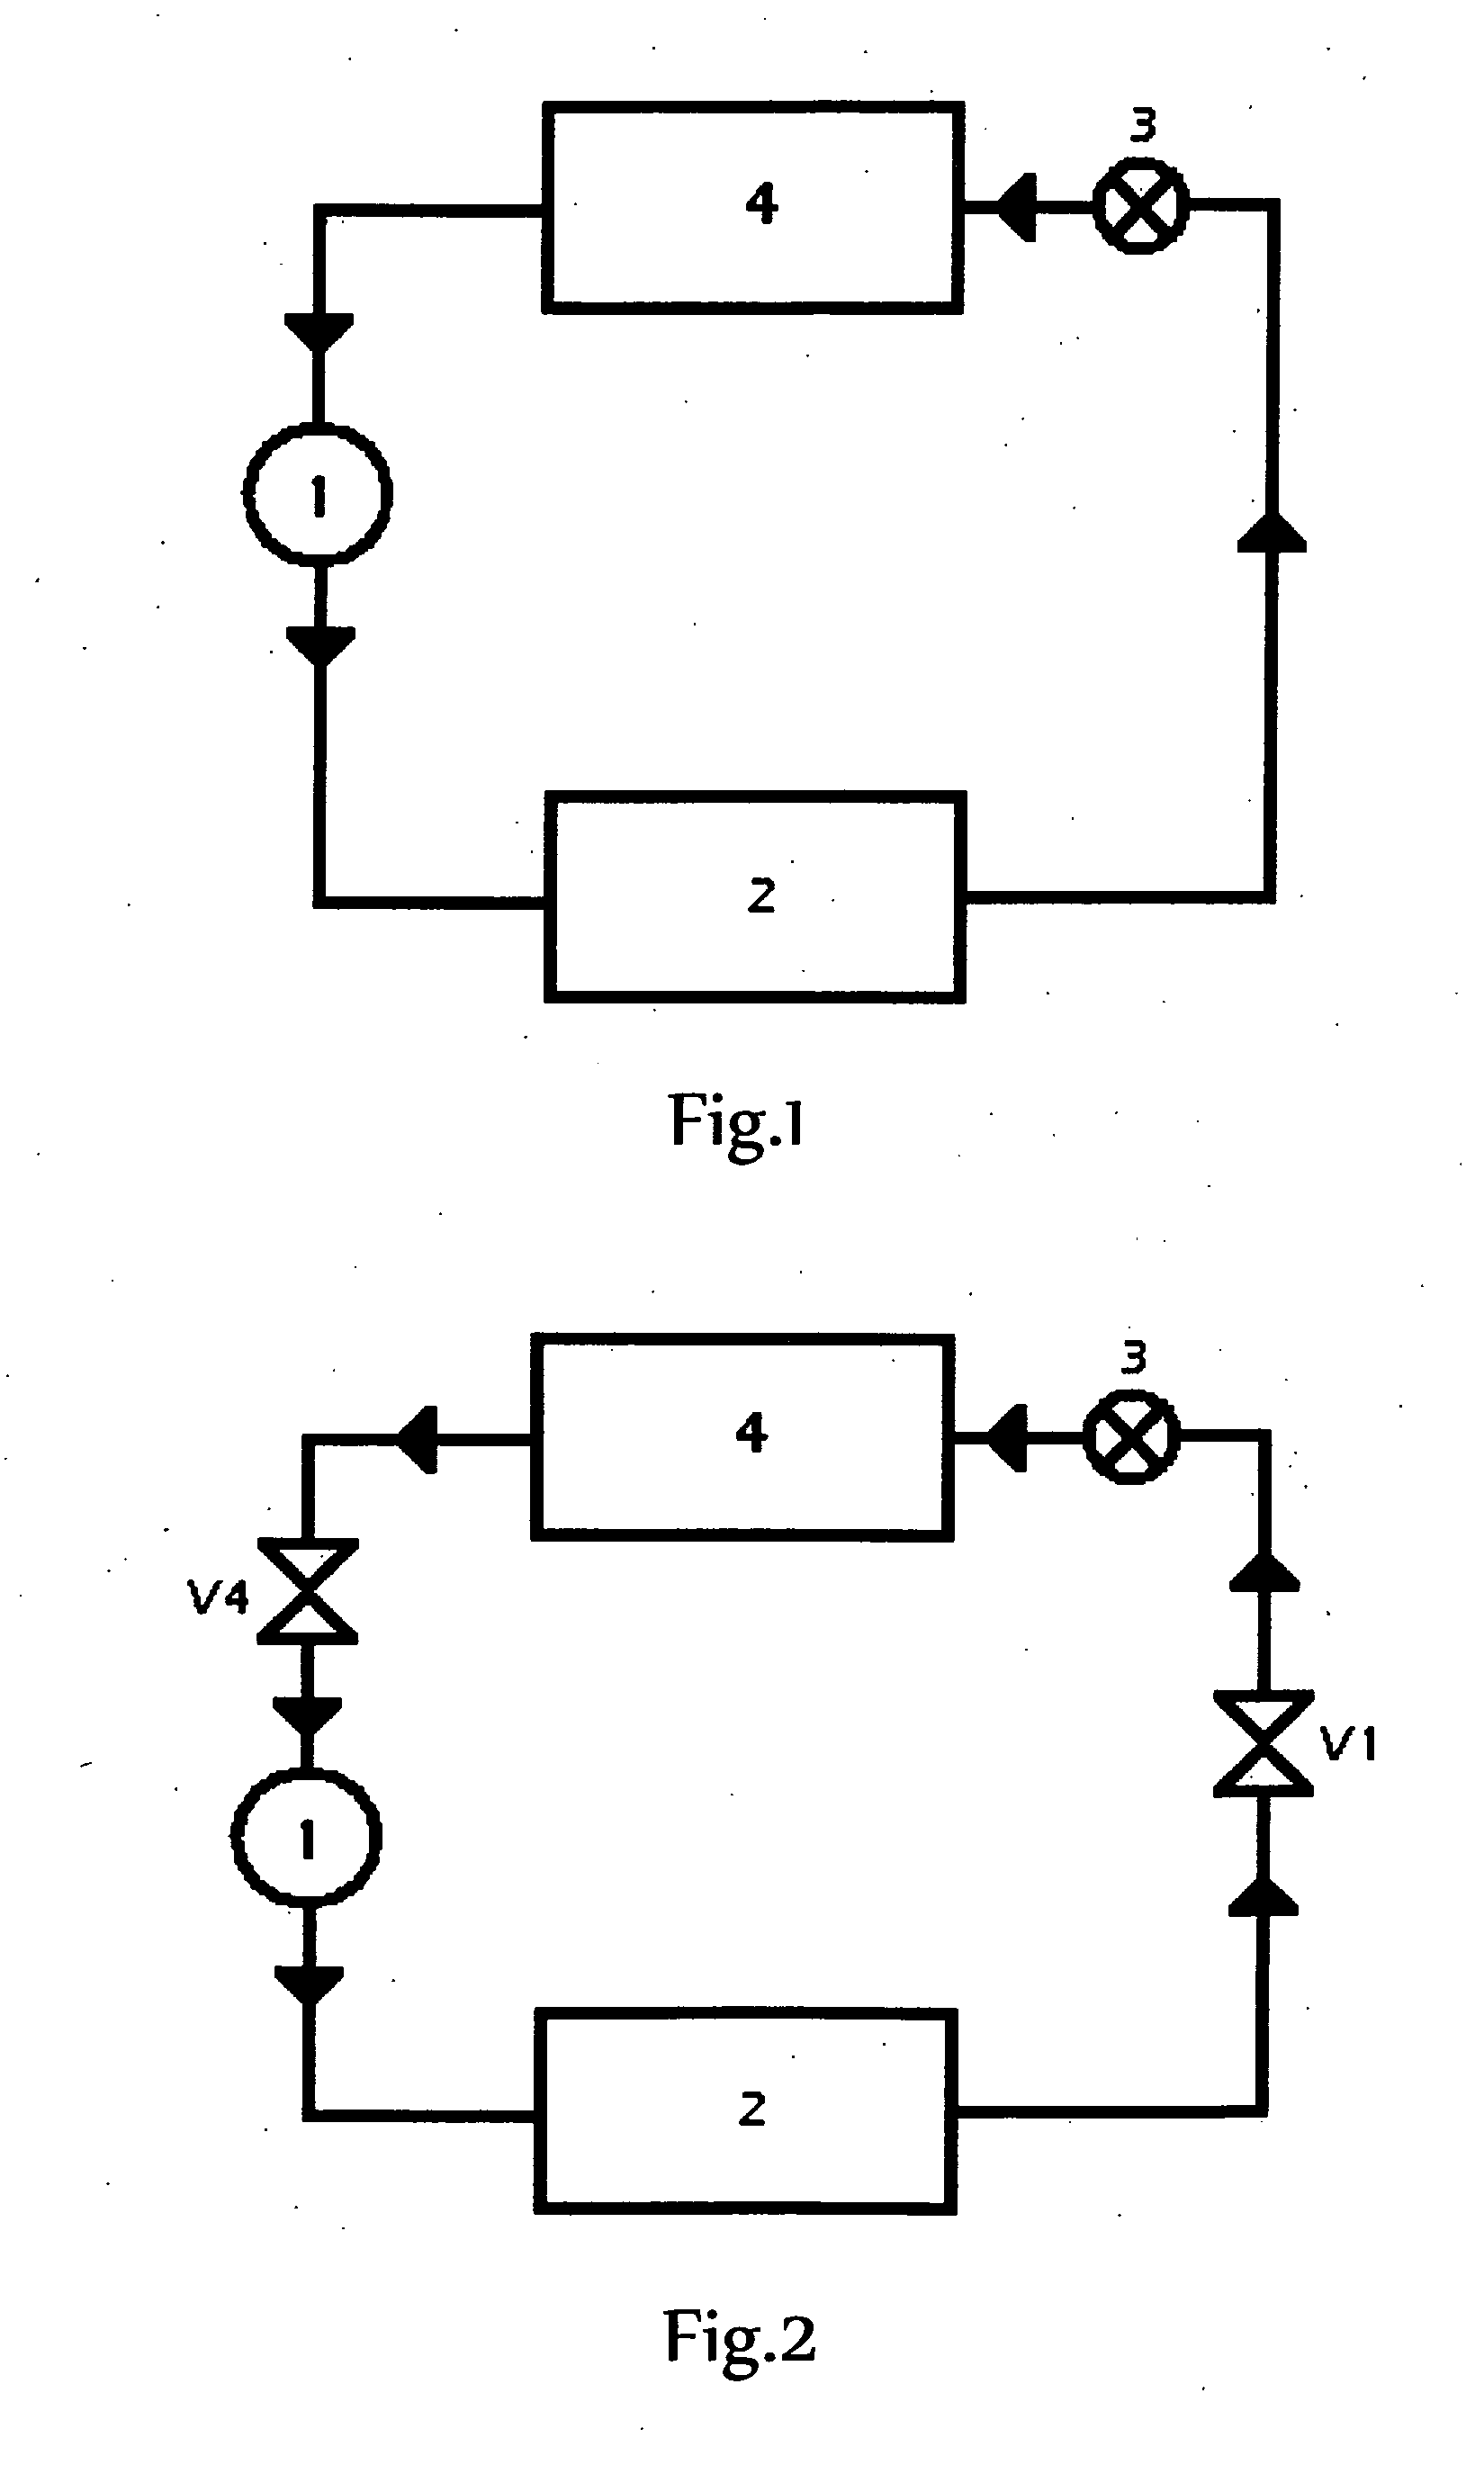 Method for efficient operation of cooling system